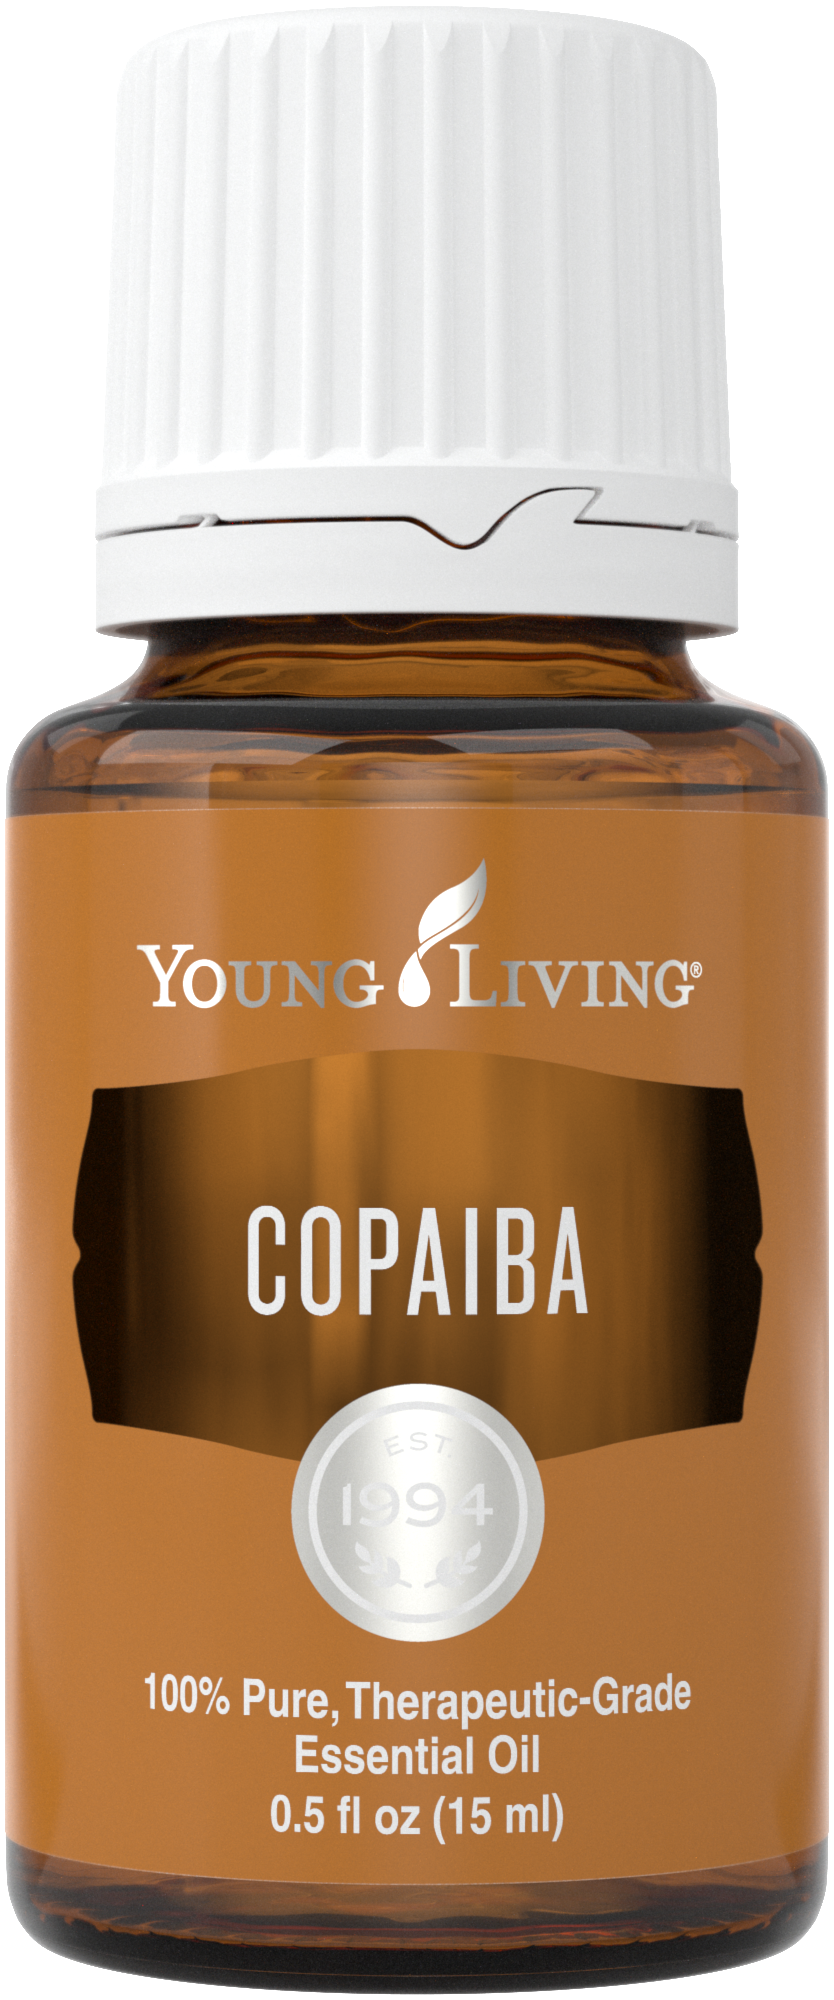 Copaiba essential oil uses | Young Living